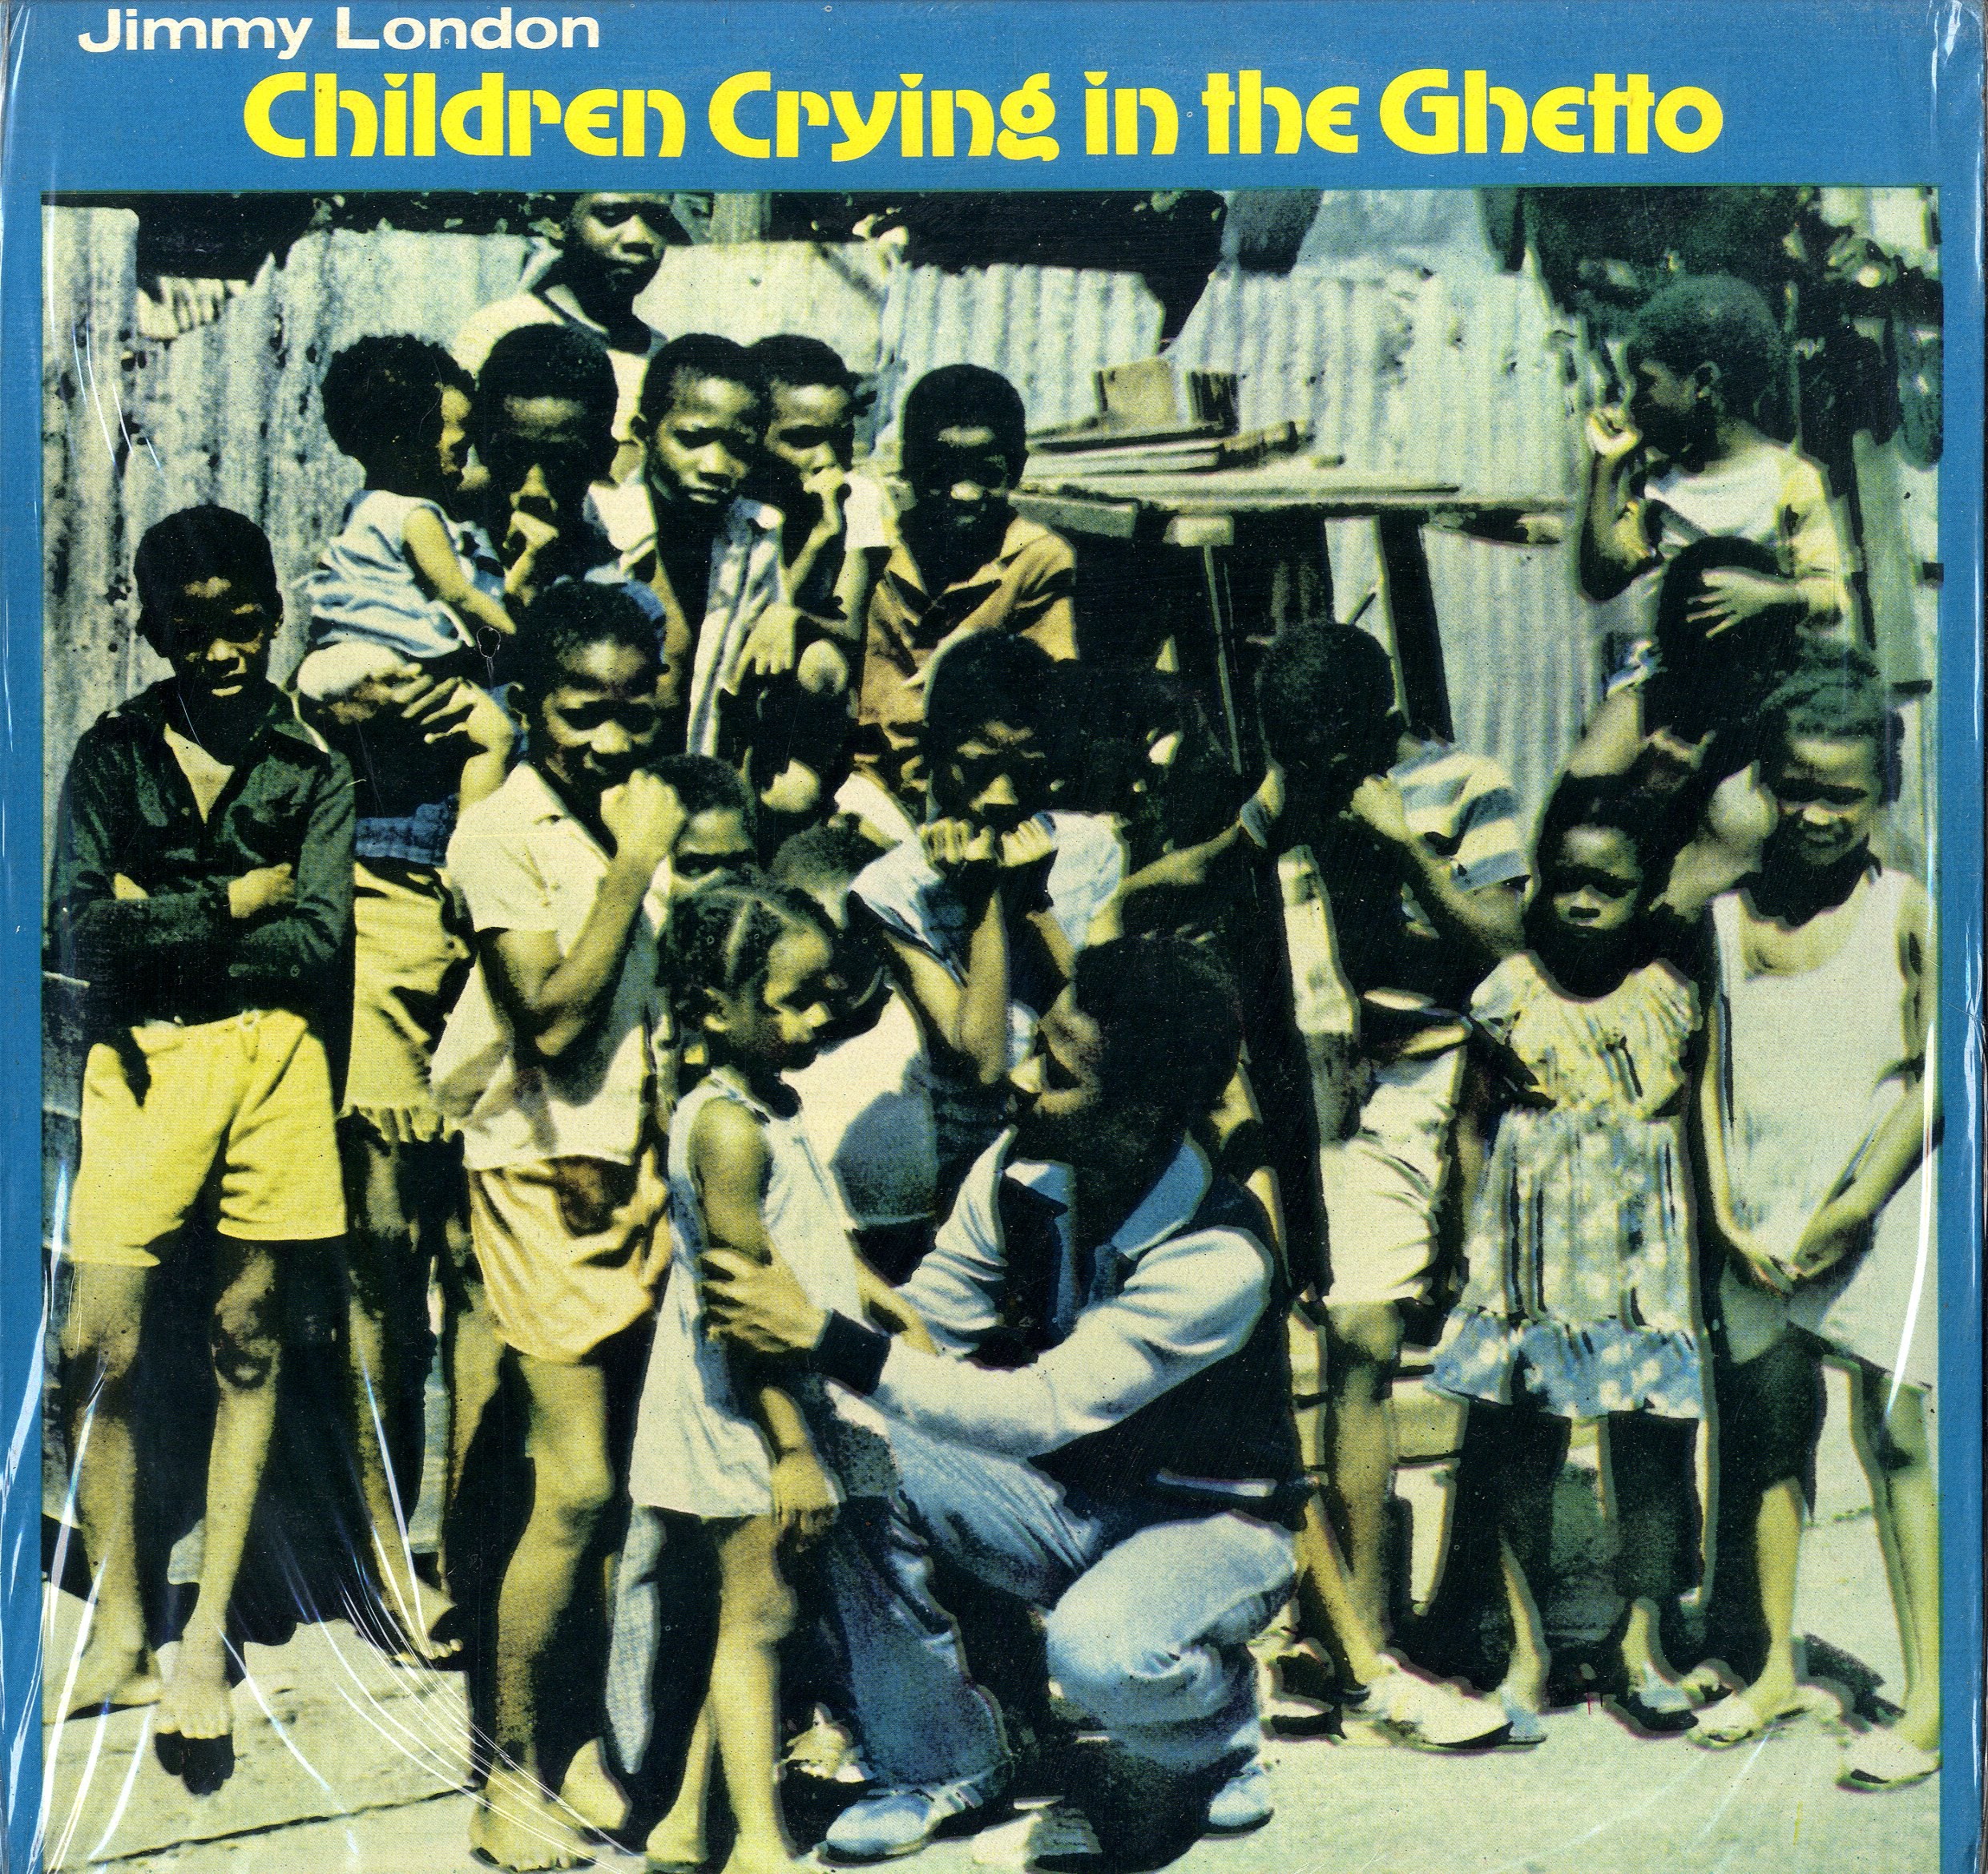 JIMMY LONDON [Children Are Crying In The Ghetto]